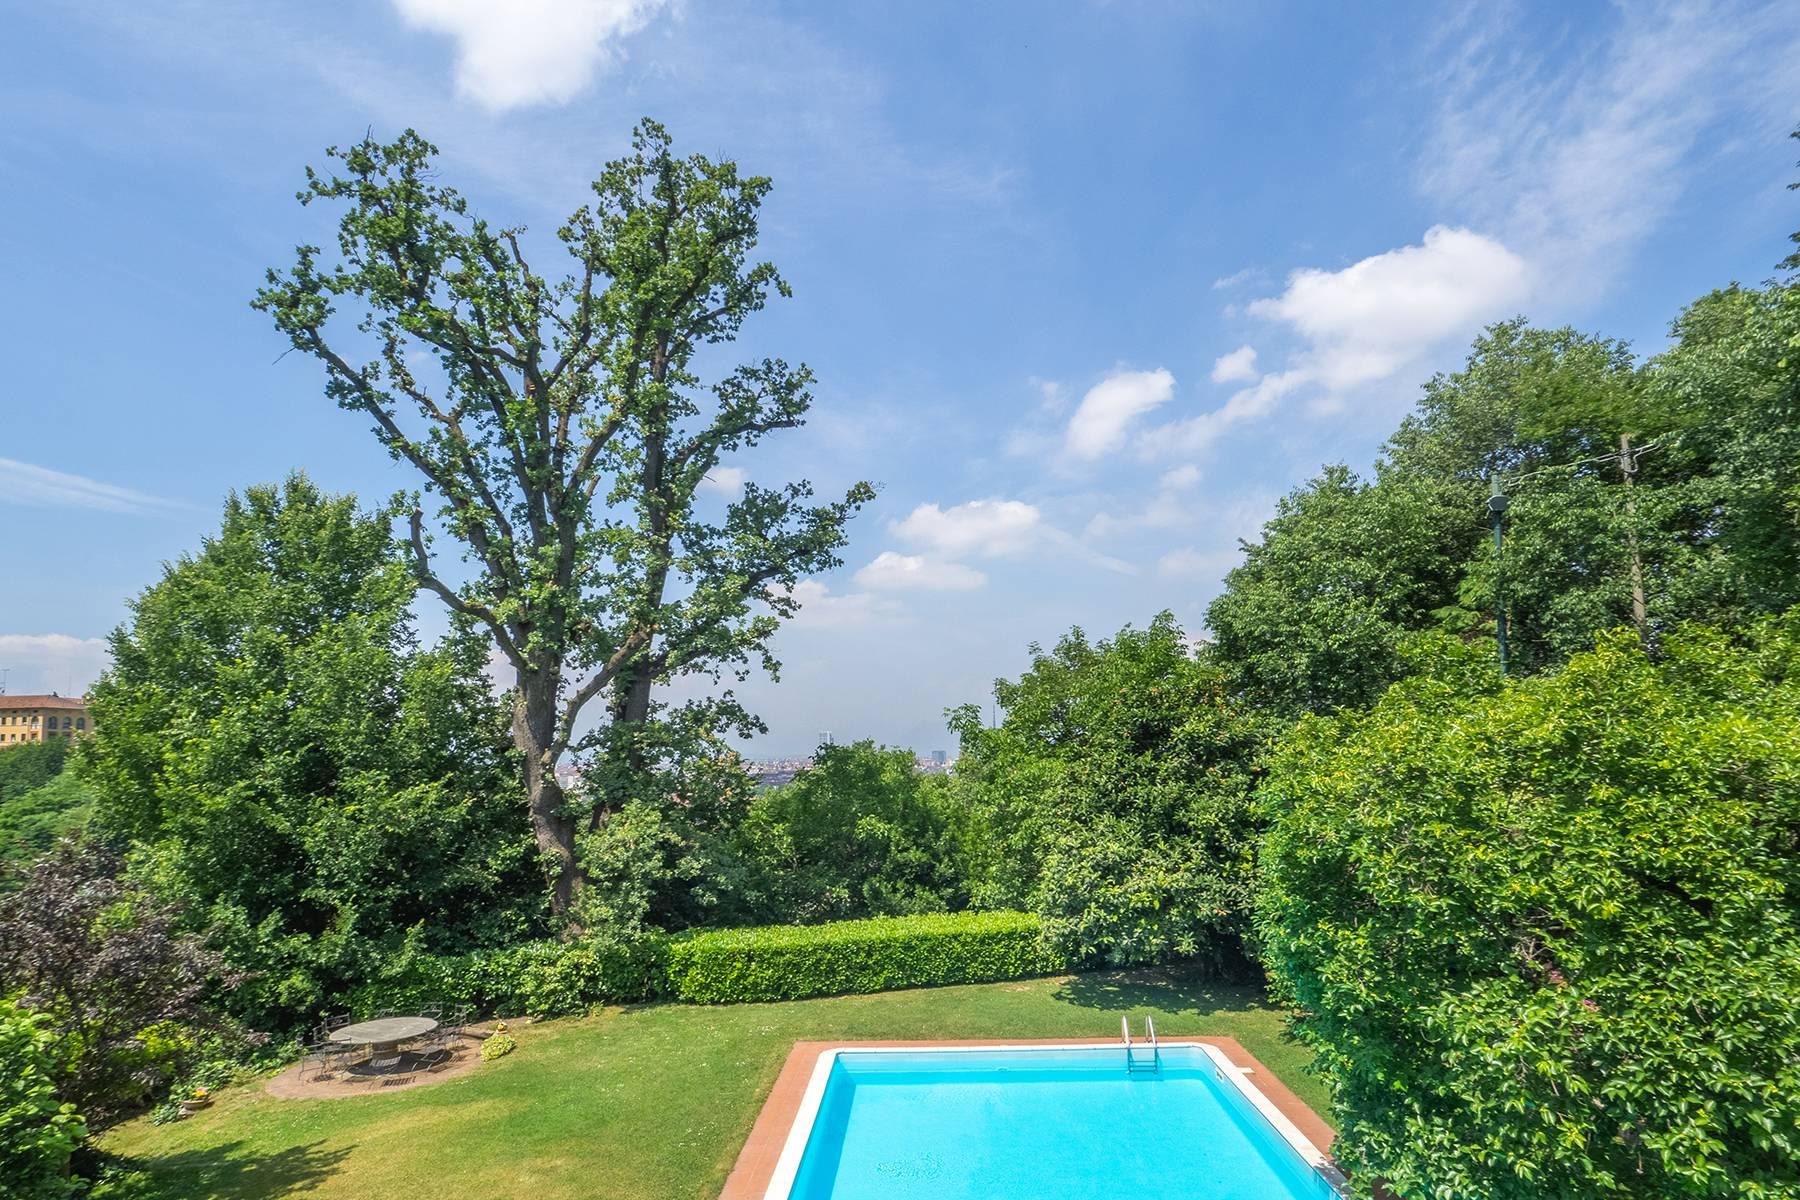 Exquisite villa with swimming pool in the hill of Turin - 12